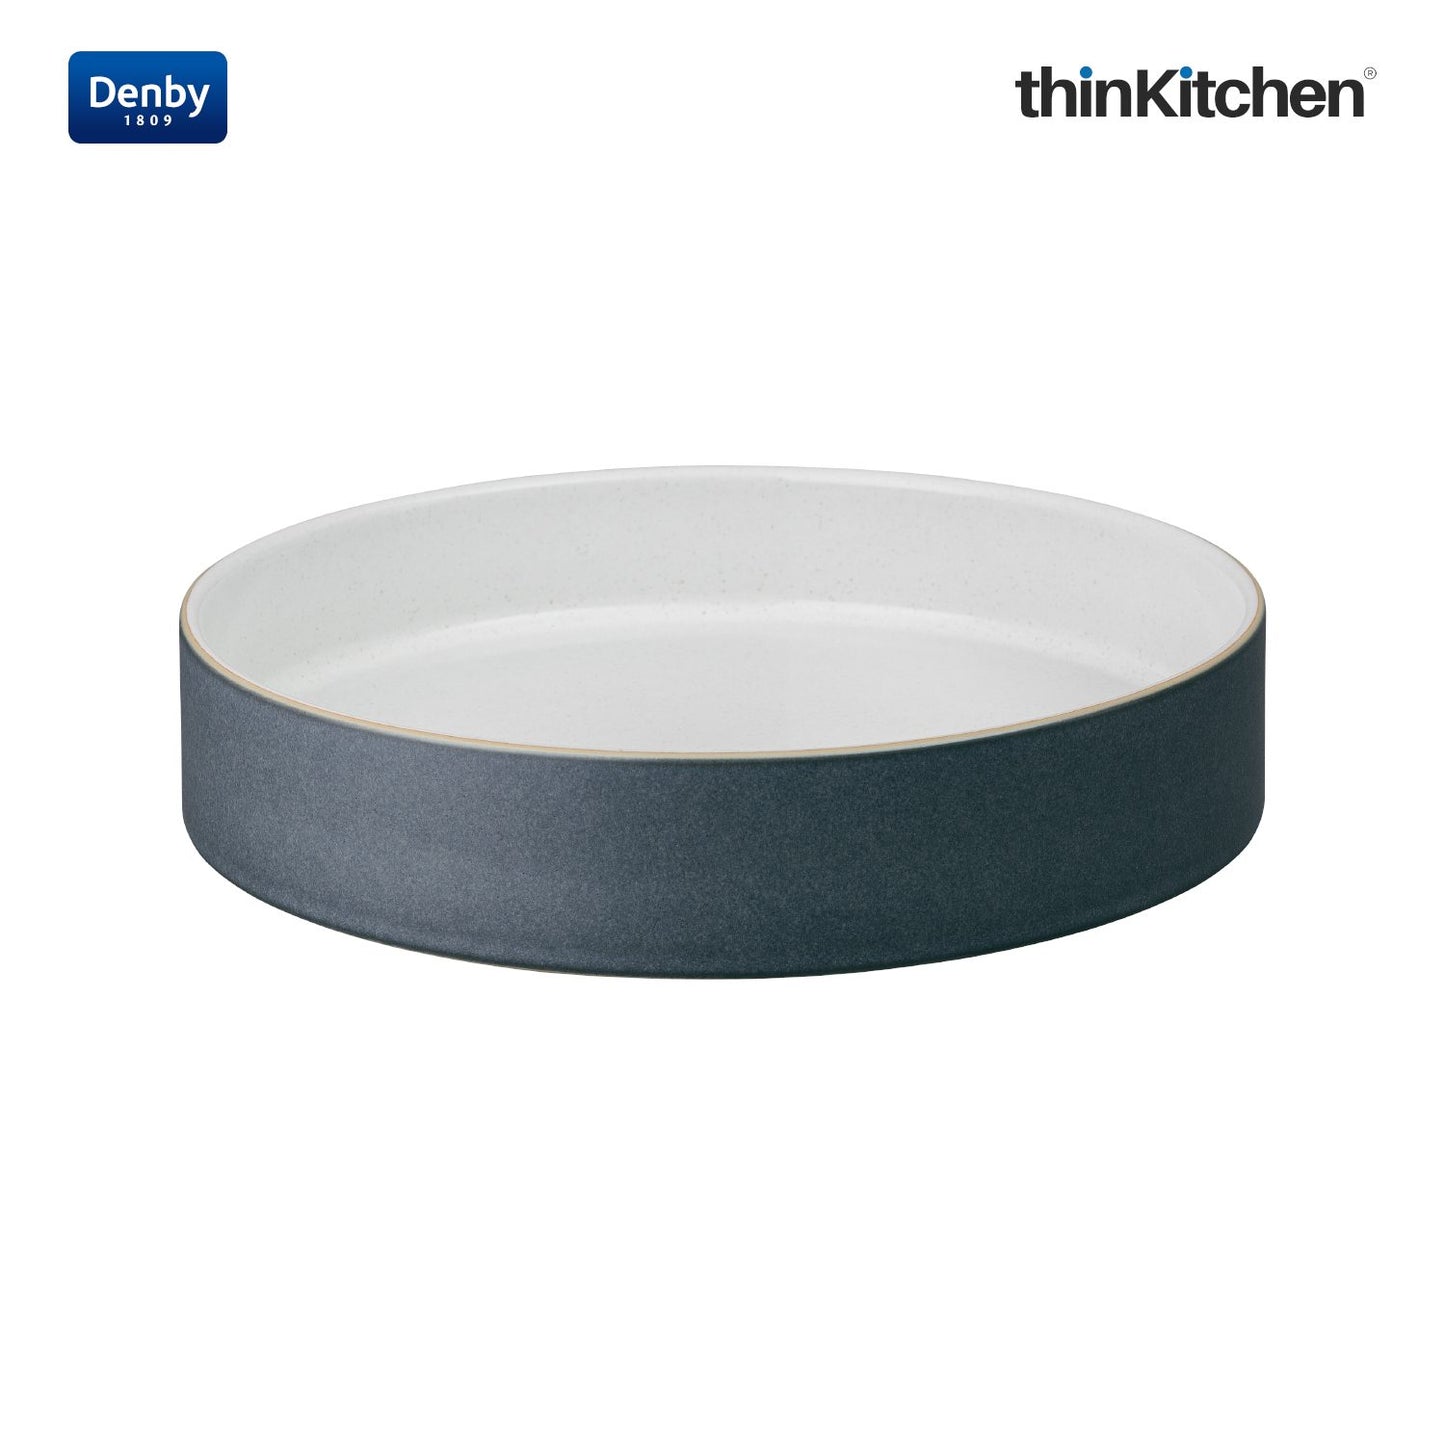 Denby Impression Charcoal Blue Straight Round Tray